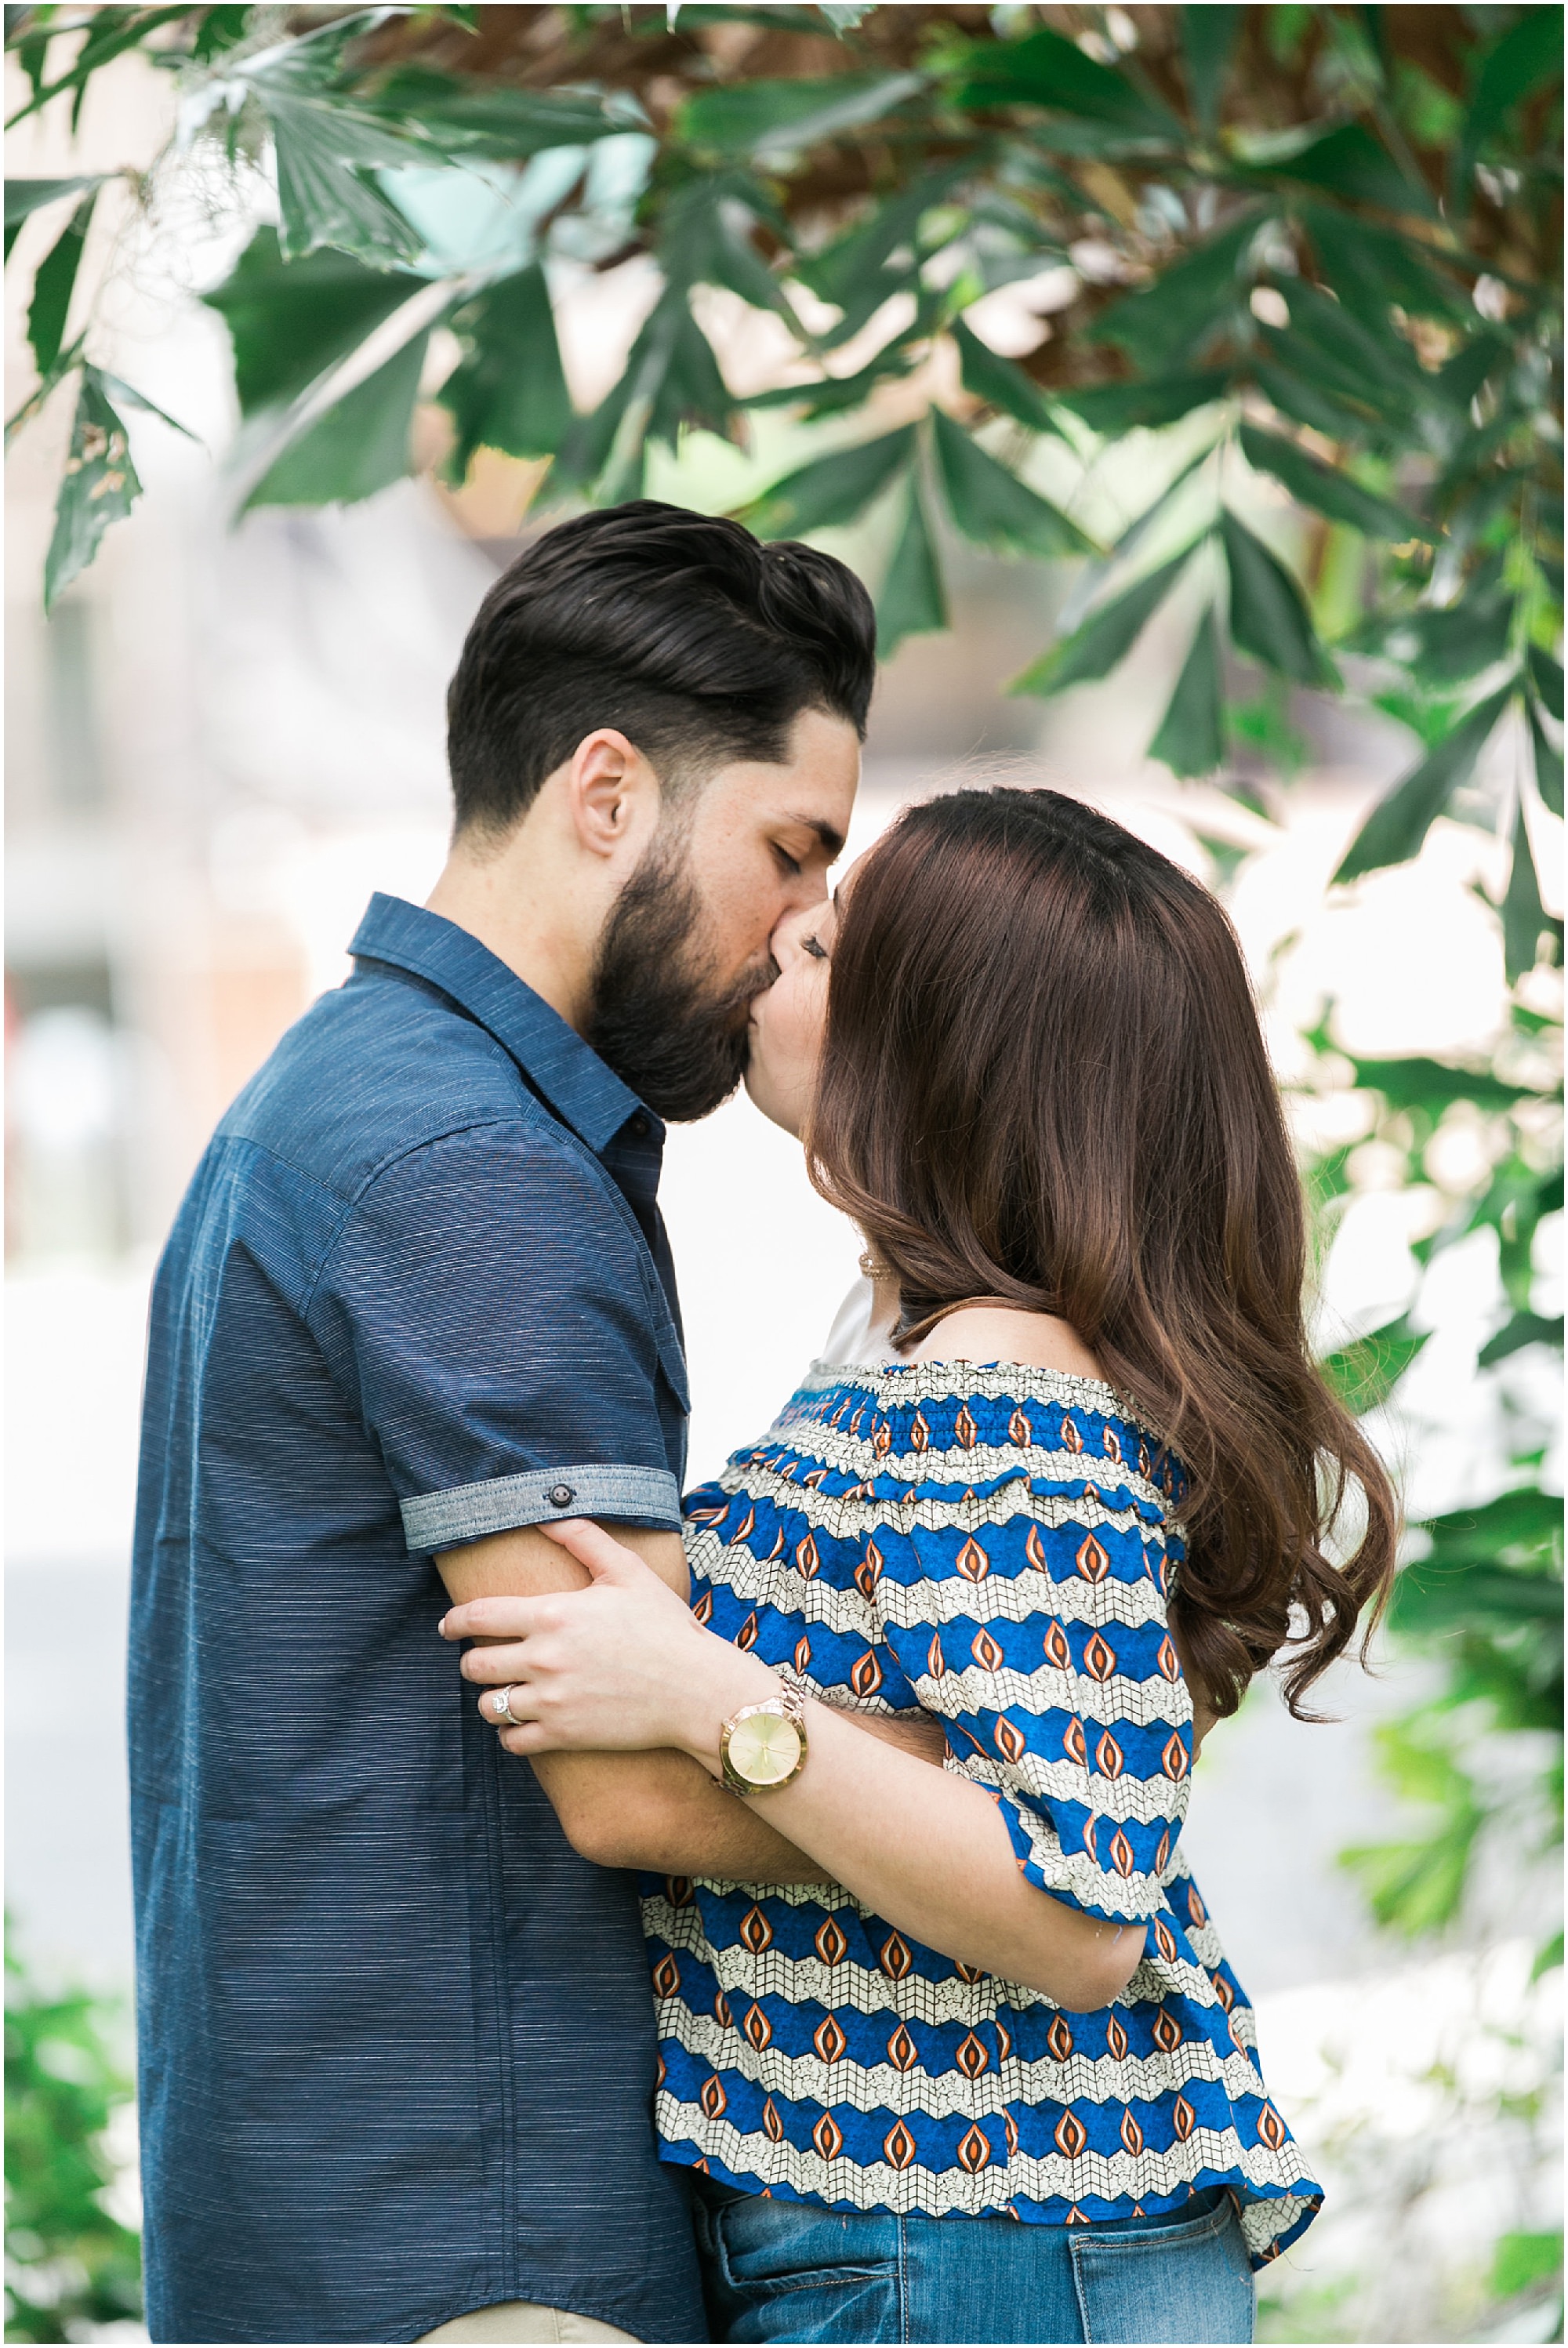 Engagement Session Tips will help you have the shoot you have been dreaming of. Engaged couple kisses in colorful casual clothes under a green tree